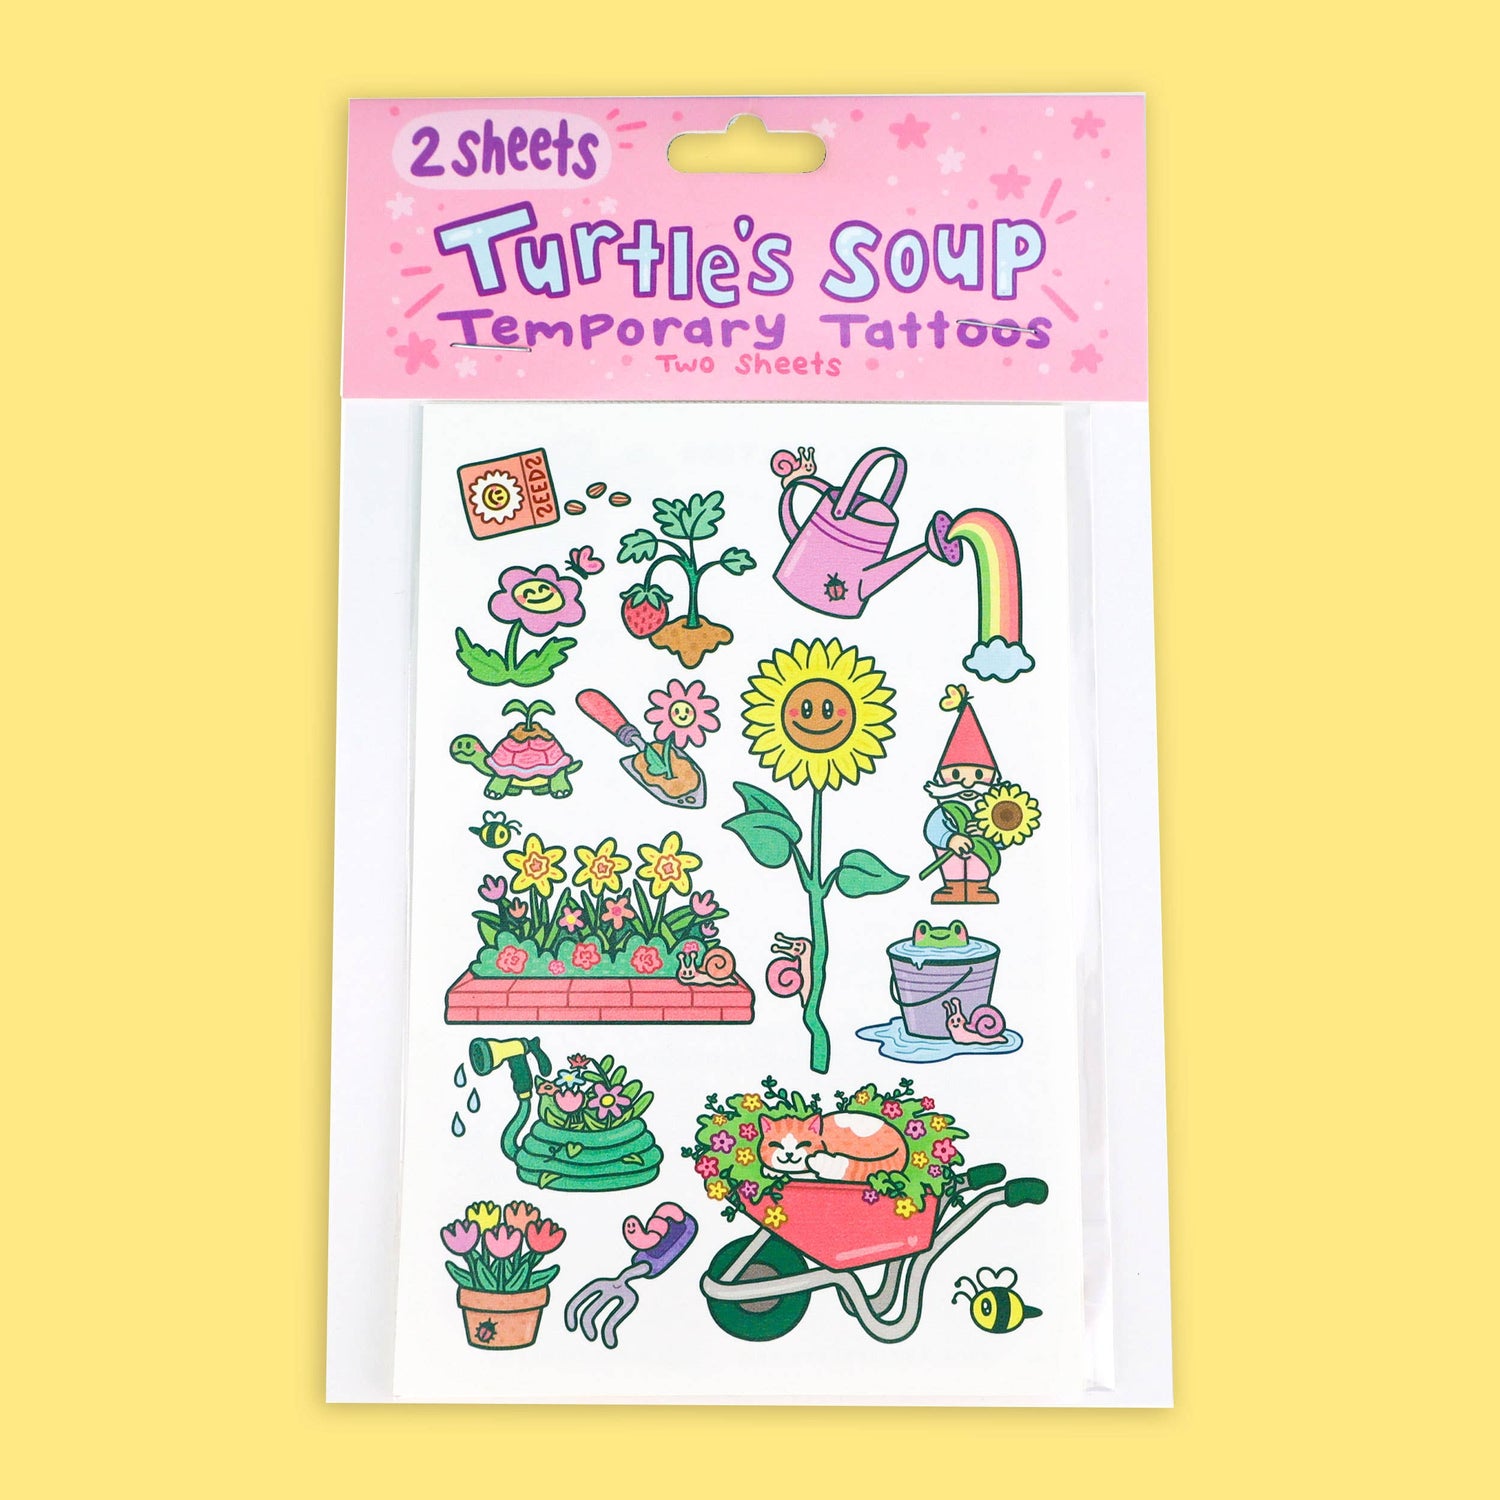 2 Sheets Temporary Tattoos with garden designs by Turtle's Soup